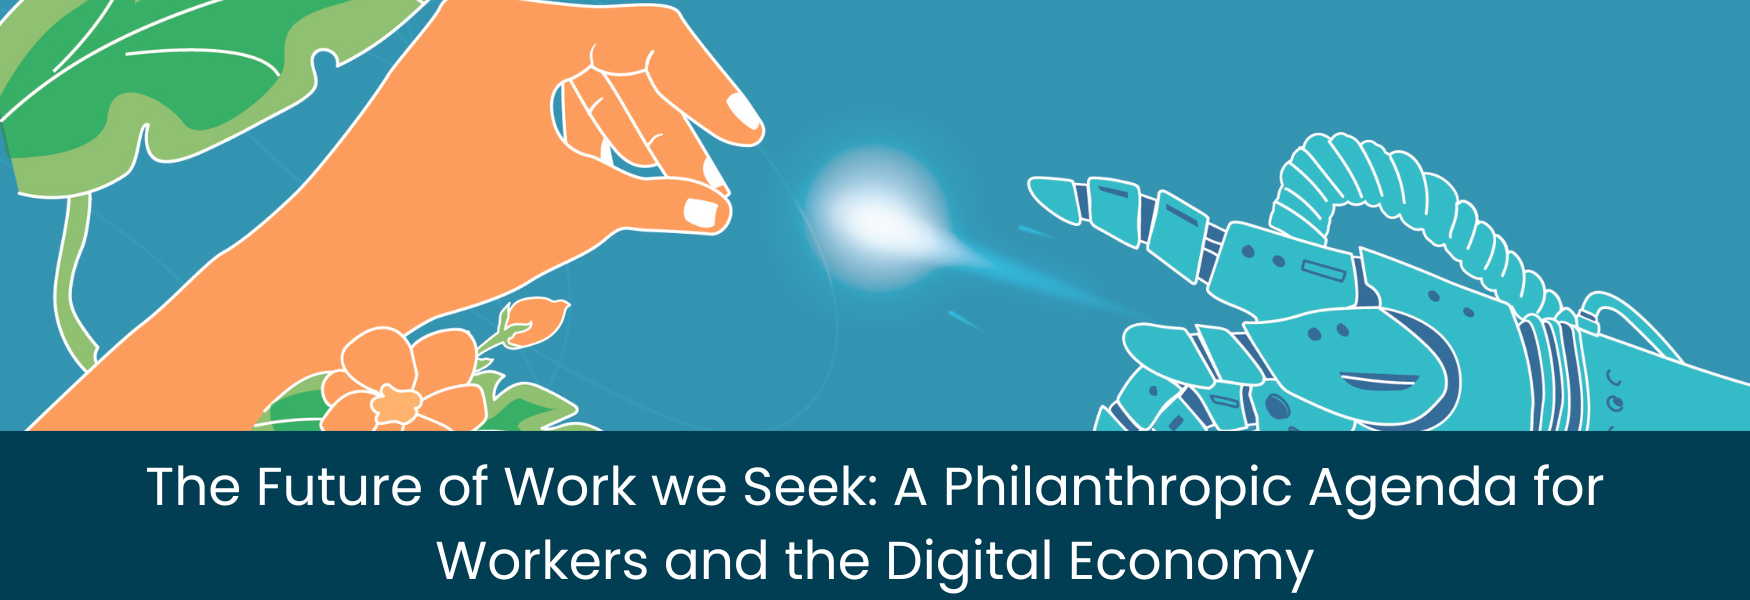 The Future of Work We Seek: A Philanthropic Agenda for Workers And the Digital Economy